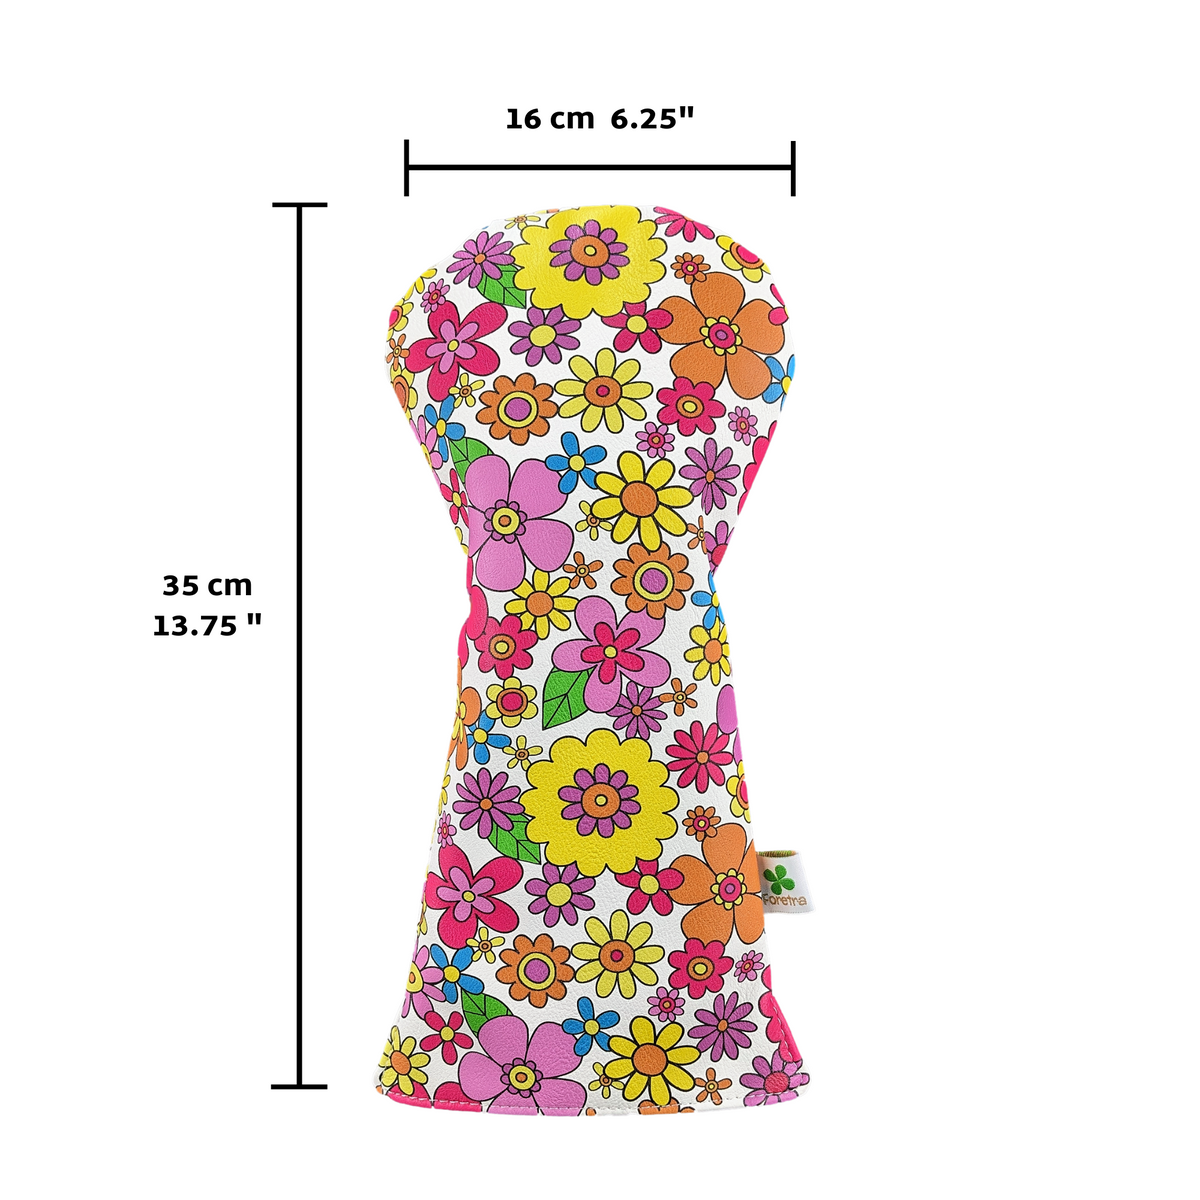 Flowers Pattern -  Driver Head Cover